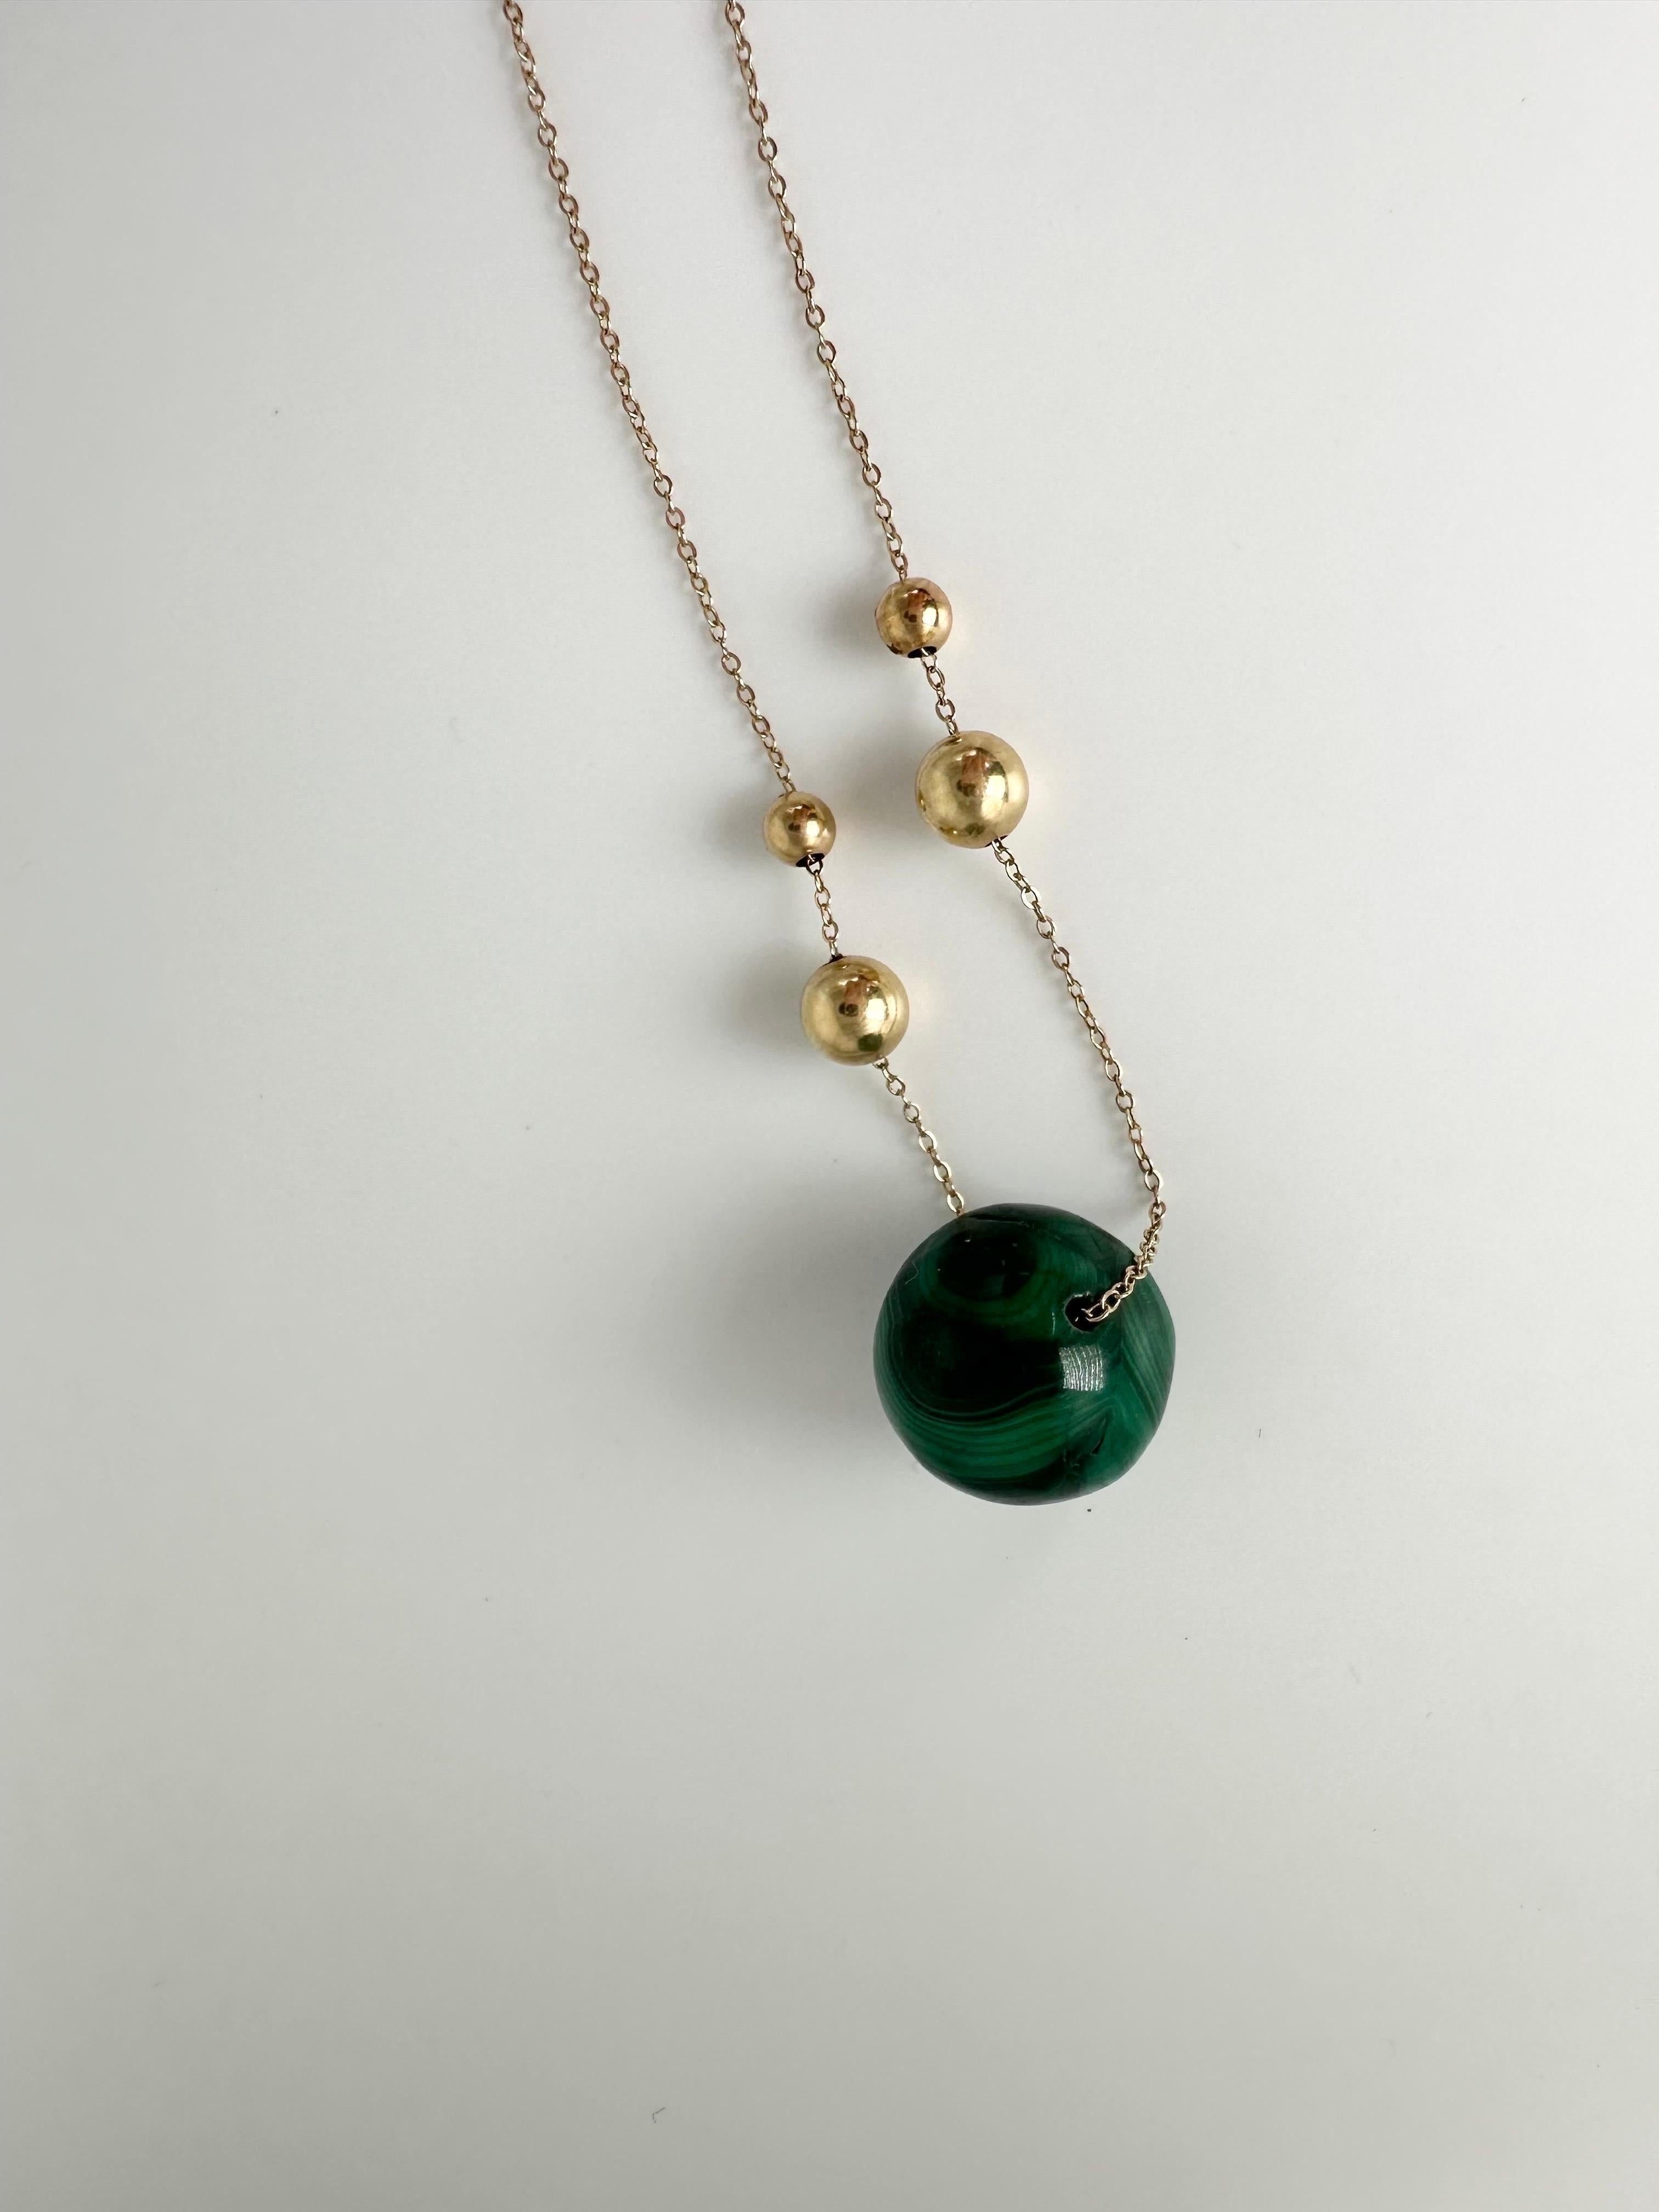 Malachite round pendant necklace in 14KT yellow gold, custom piece with unique character!

GOLD: 14KT gold
Grams:13.48
Malachite: Natural 18mm
15